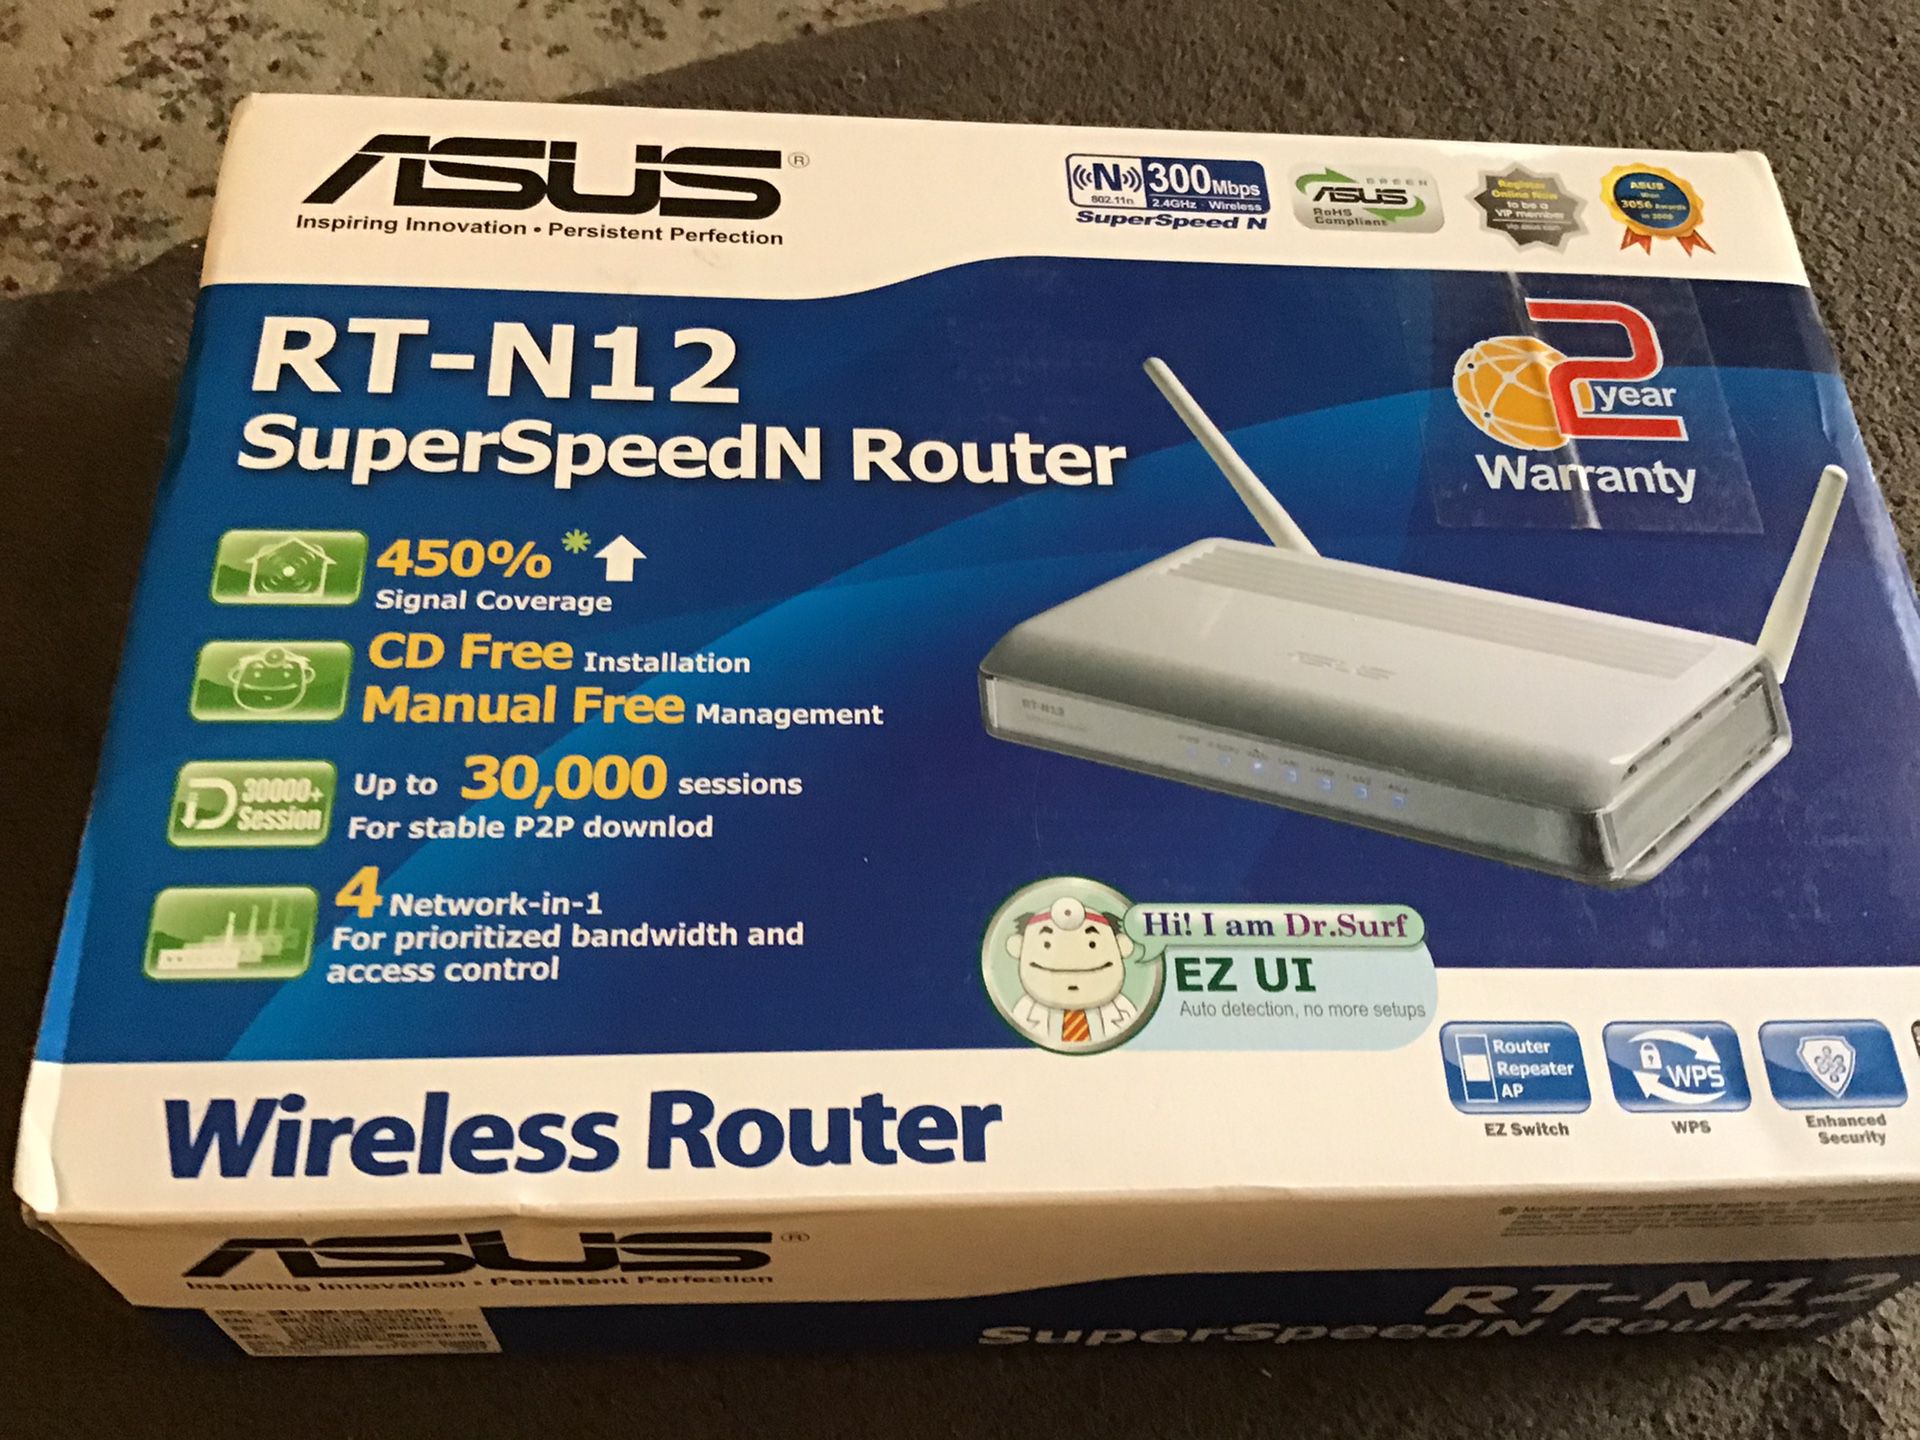 ASUS RT-N12 - Wireless router - 4-port switch - 802.11b/g/n (draft 2.0) - 2.4 GHz ASUS RT-N12 - wireless router - 802.11b/g/n (draft 2.0) - desktop